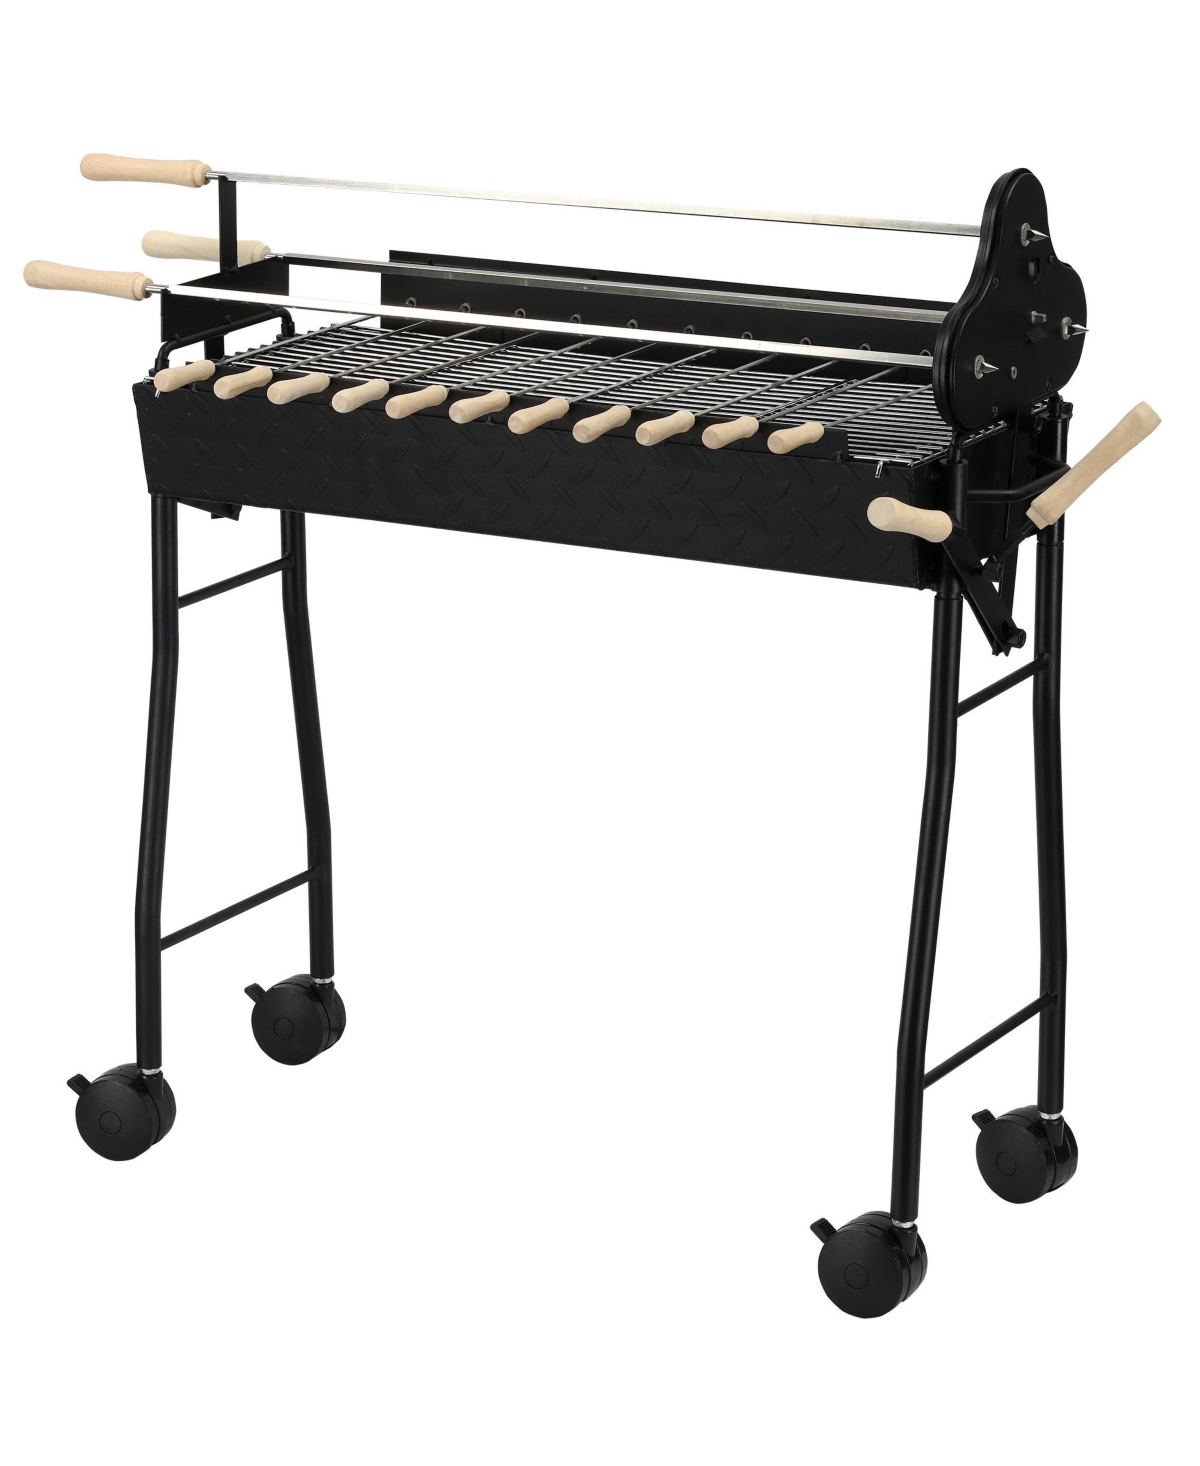 Portable Charcoal Bbq Grills Steel Rotisserie Outdoor Cooking Height Adjustable with 4 Wheels Large / Small Skewers Portability for Patio, Ba